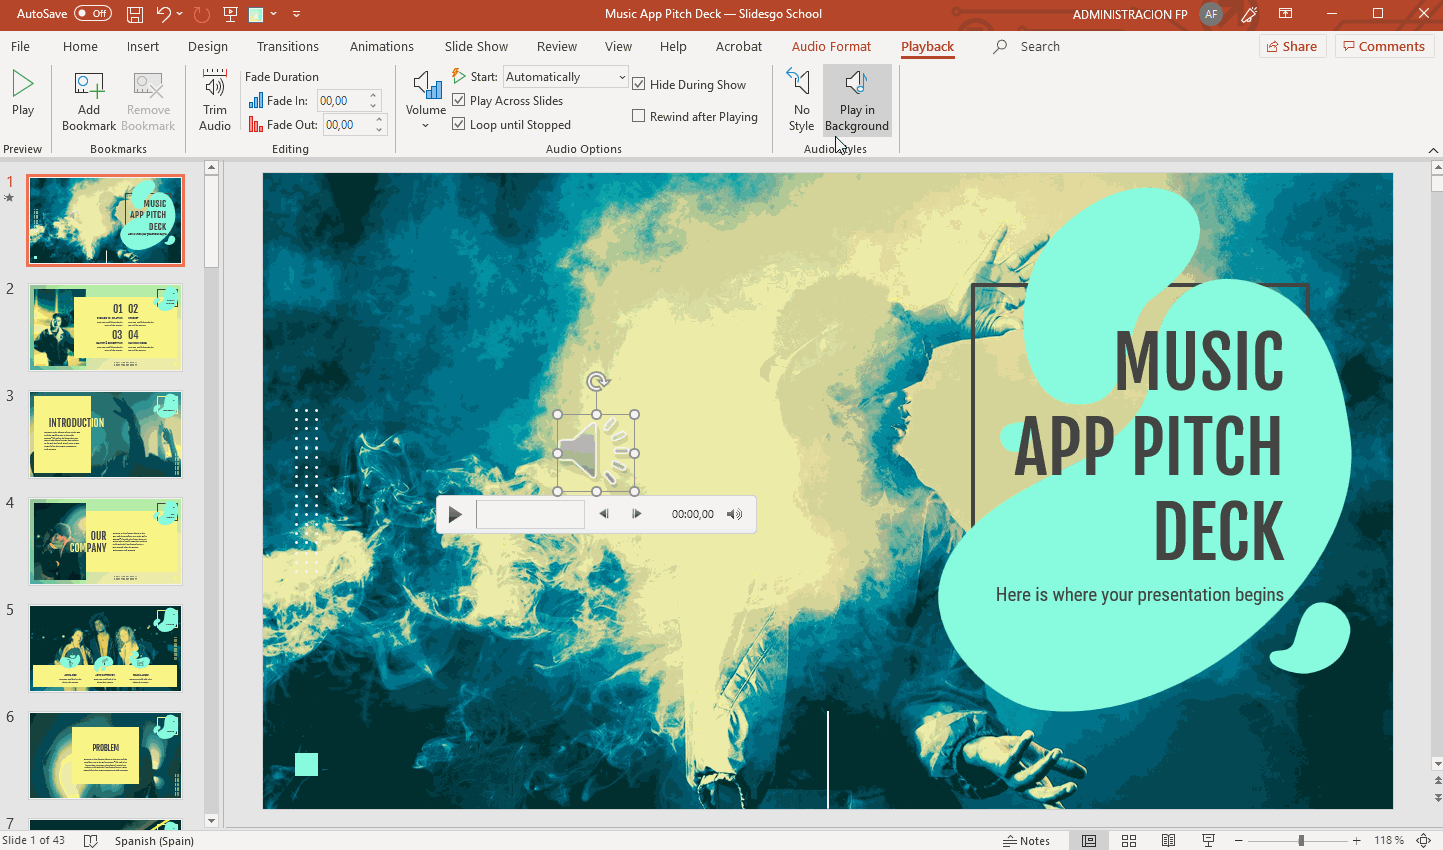 How to Add, Record or Edit Audio or Music in PowerPoint -14